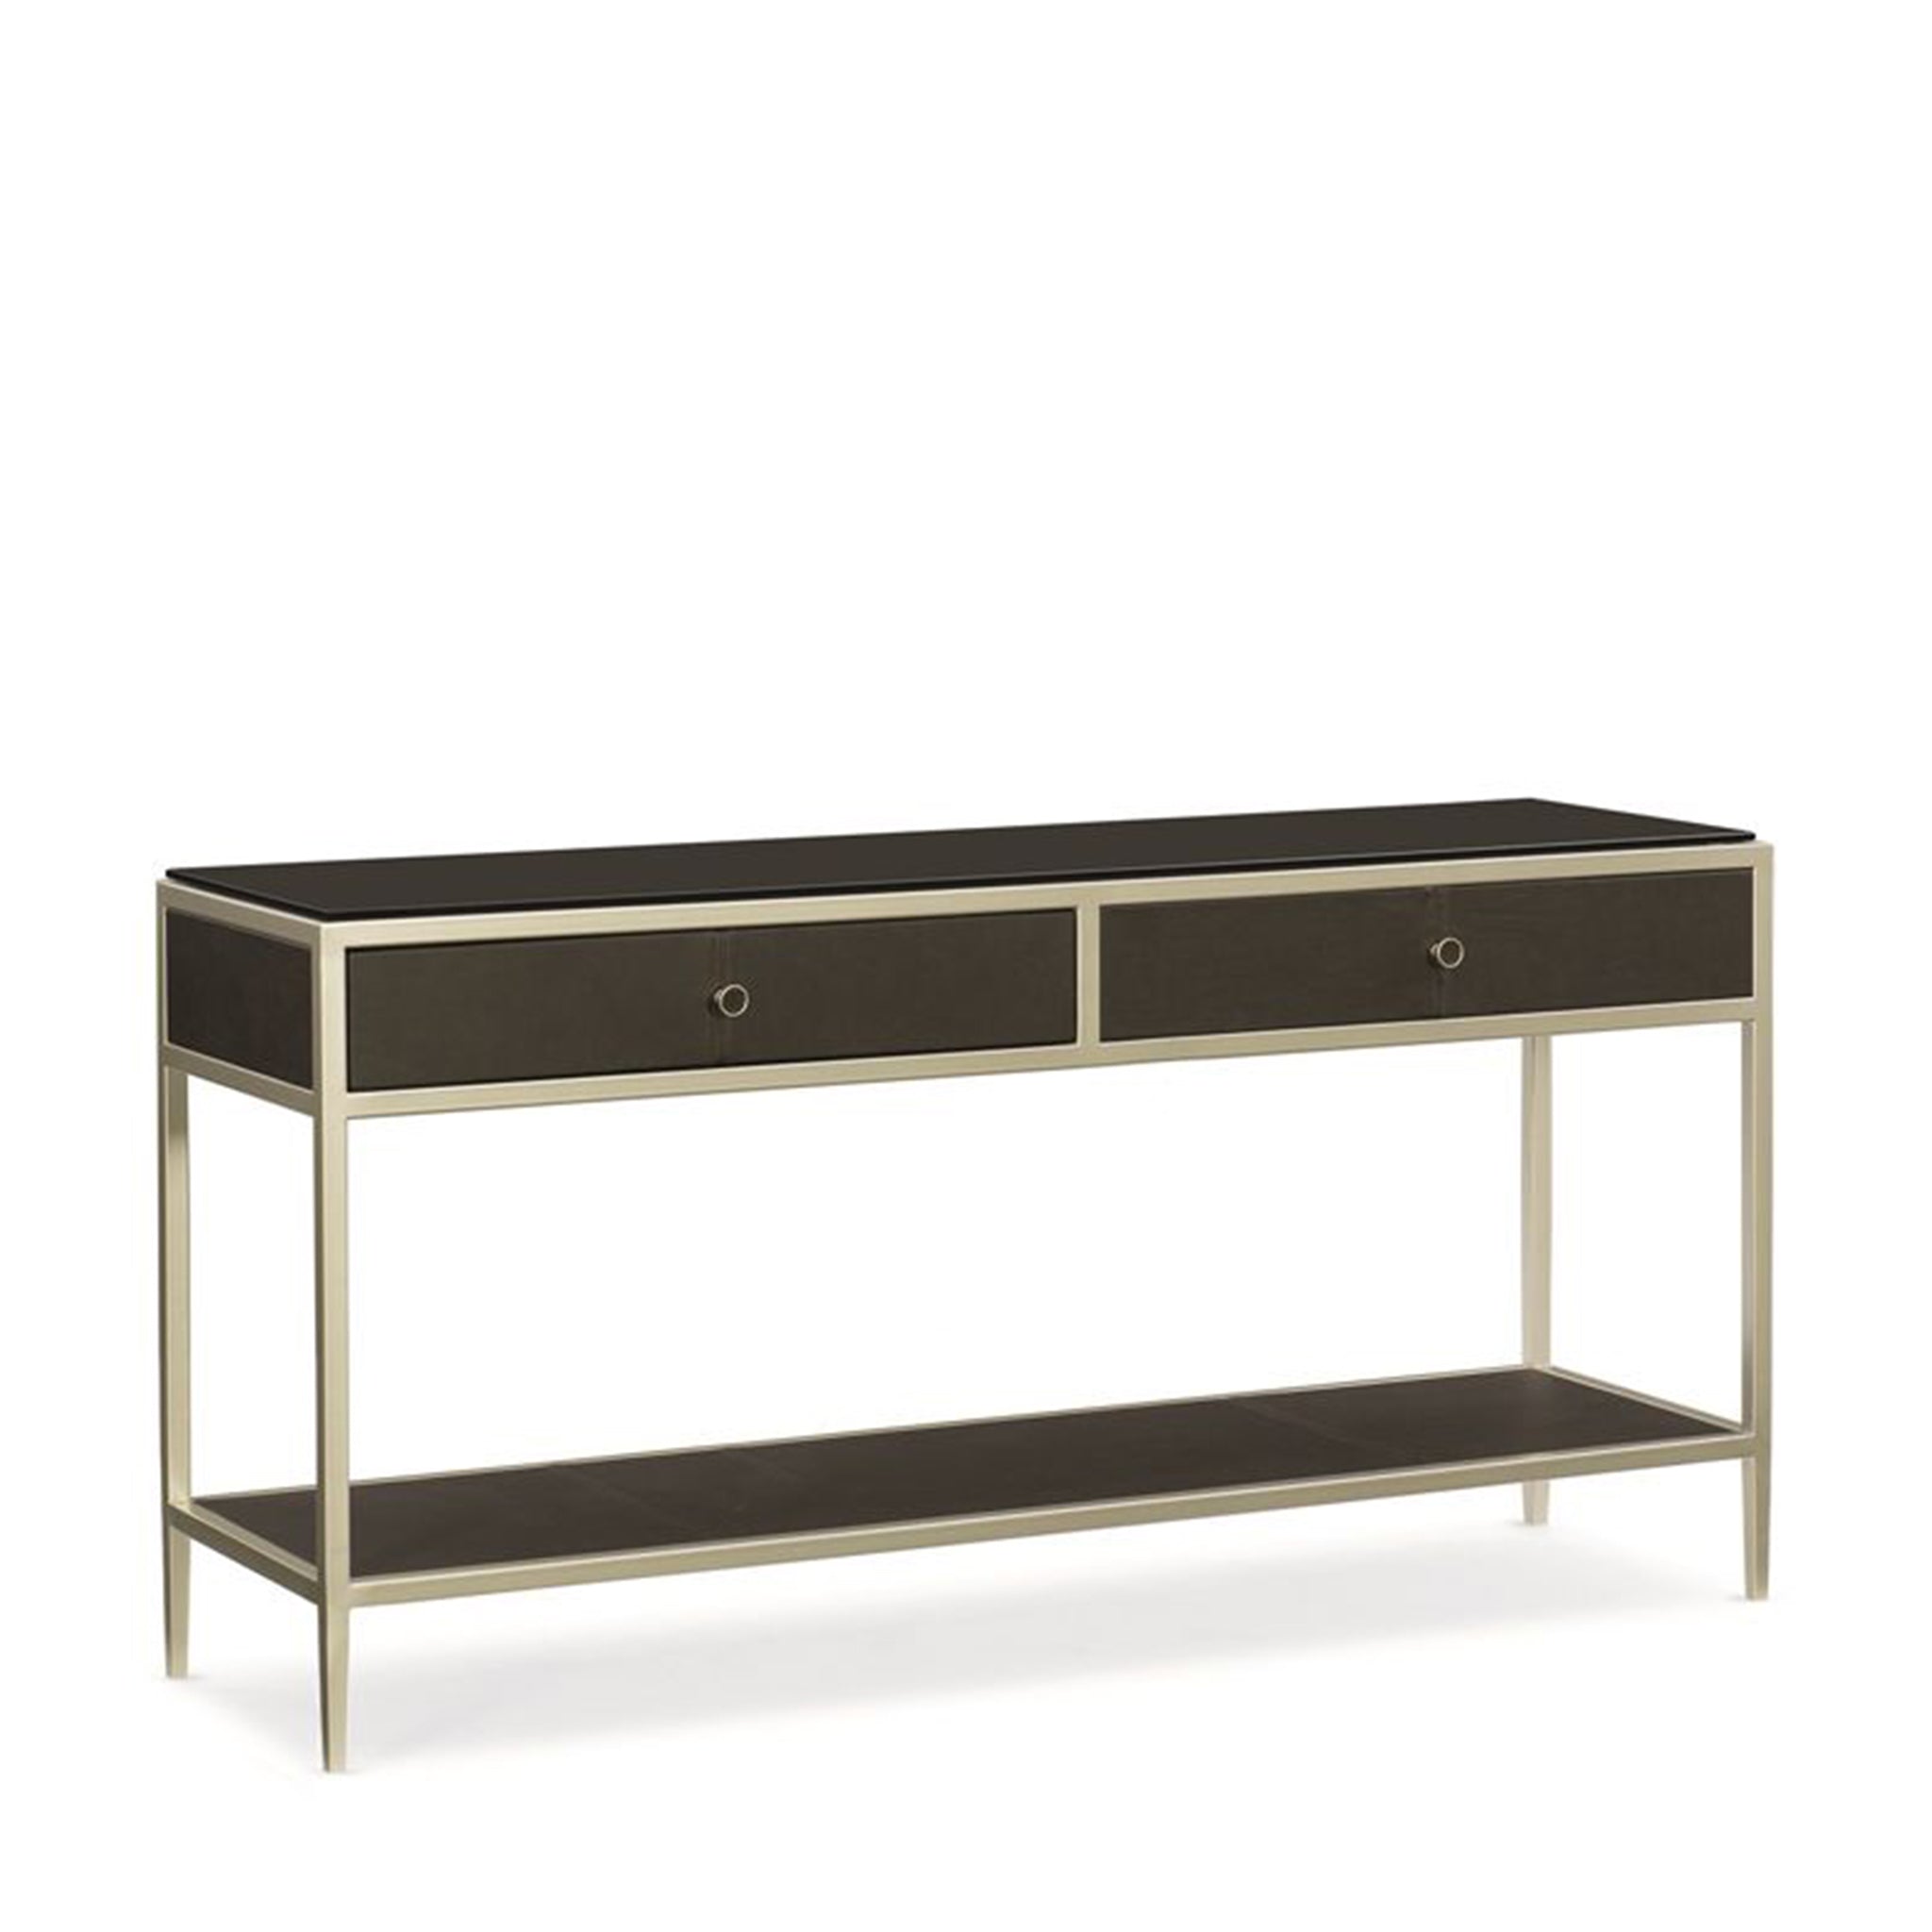 UPTOWN CONSOLE TABLE